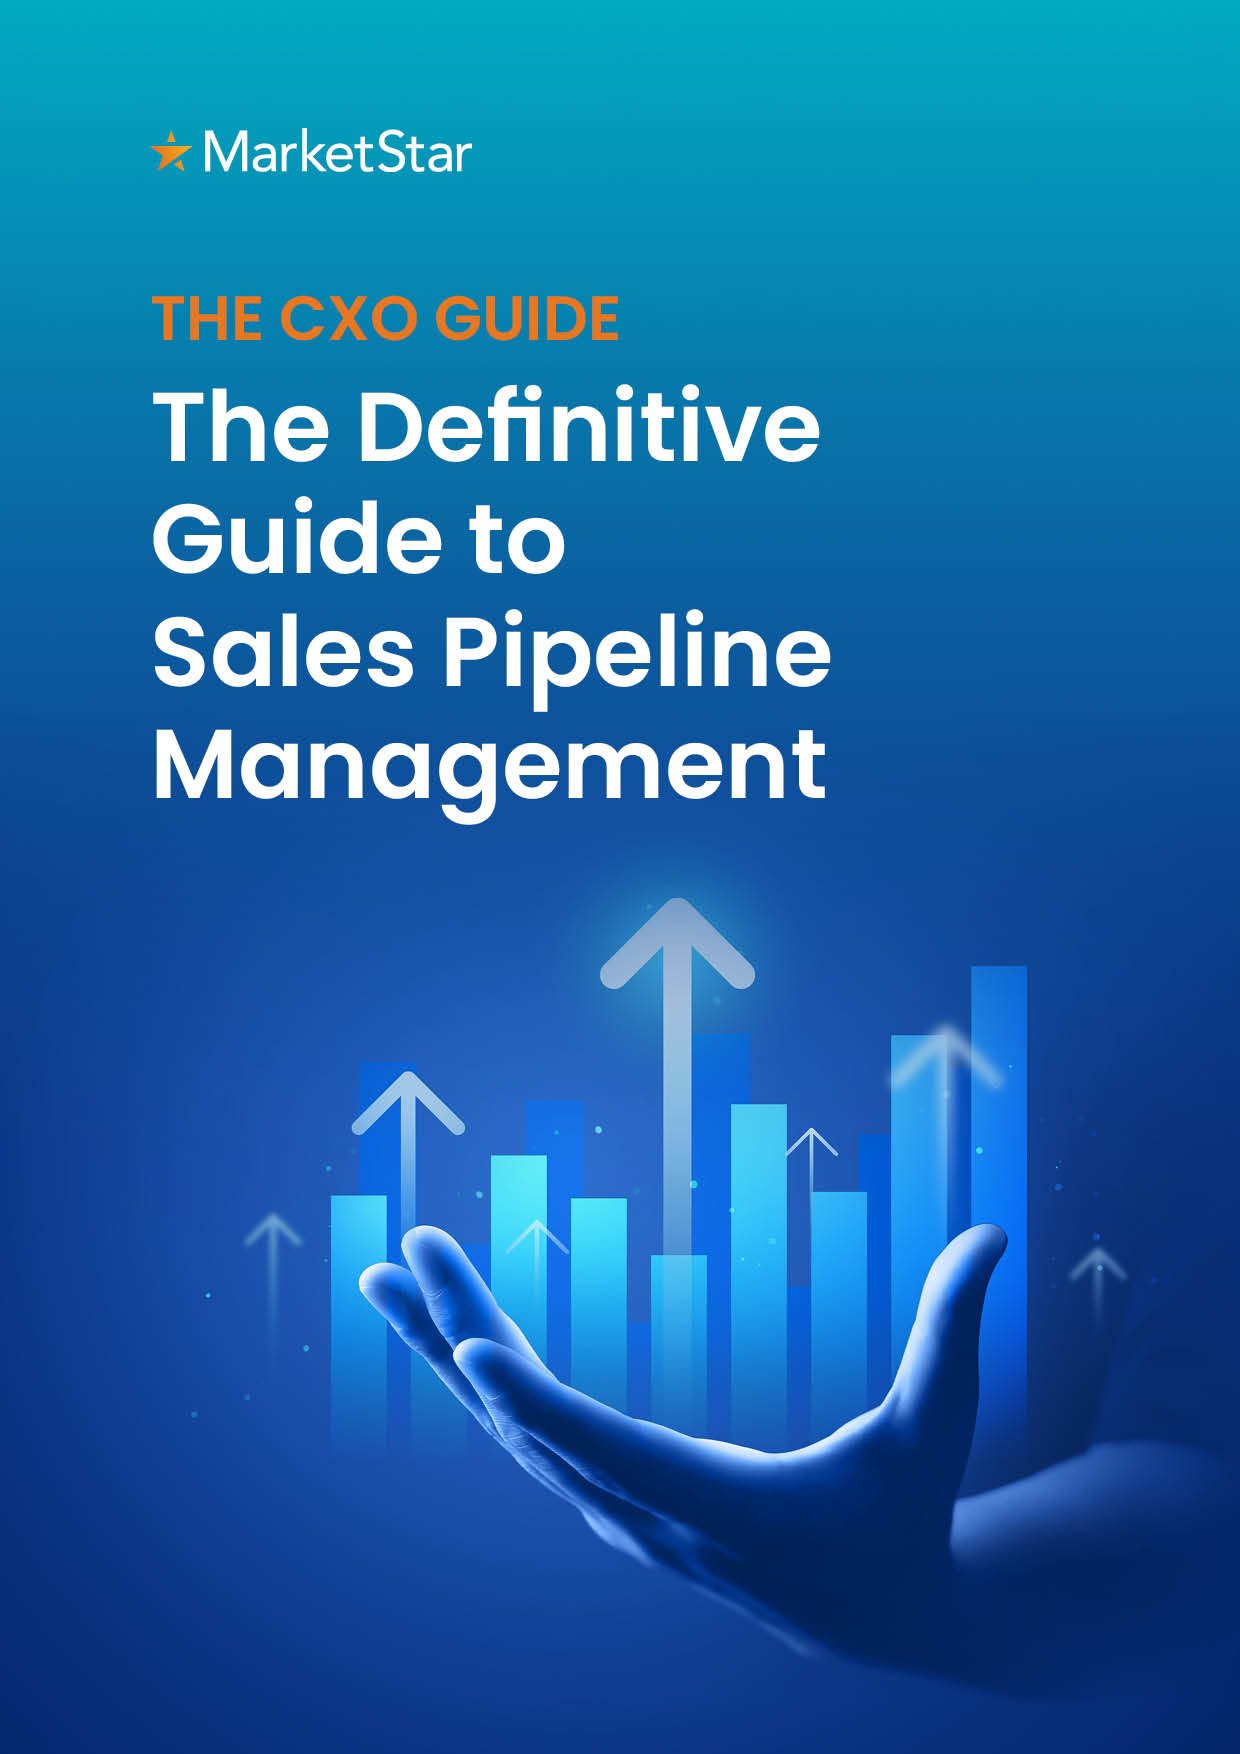 CXO_Guide_The Definitive Guide to Sales Pipeline Management-1